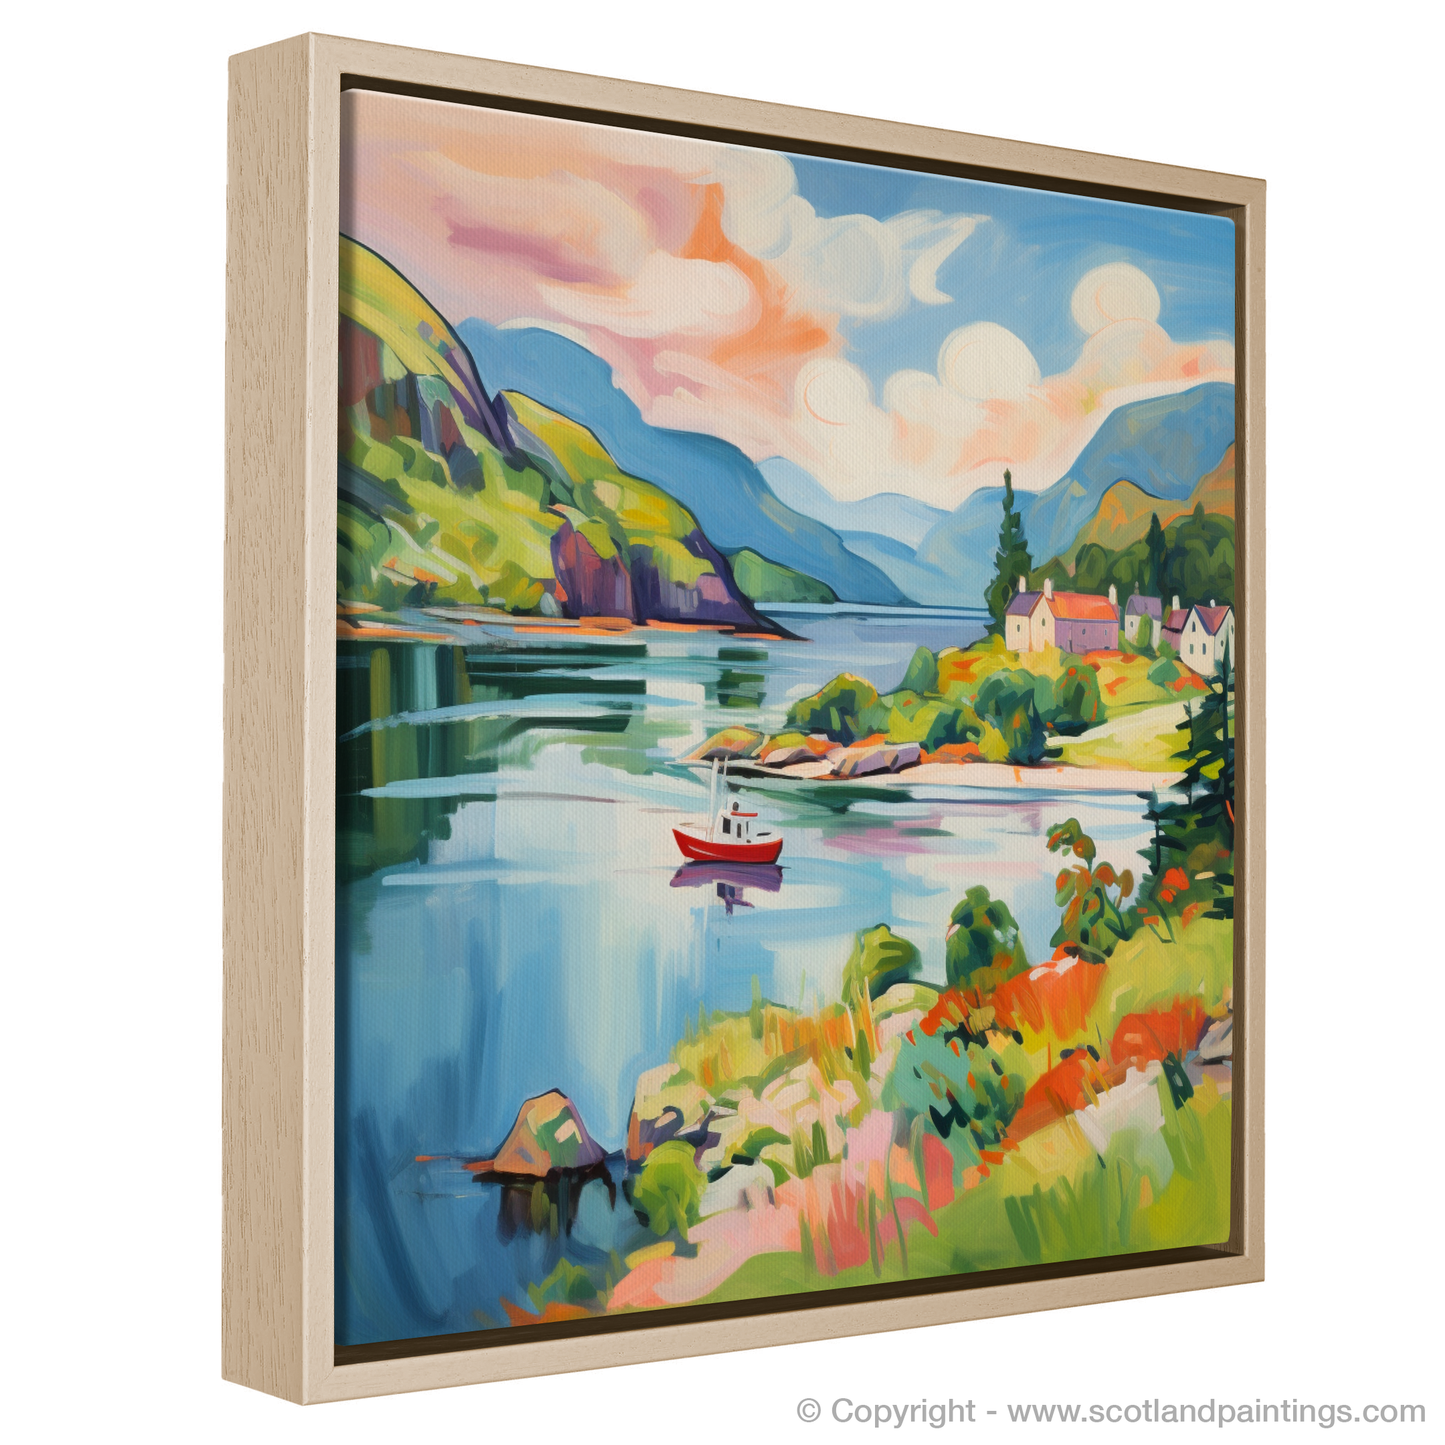 Painting and Art Print of Loch Morar, Highlands in summer entitled "Highland Haven: A Fauvist Ode to Summer in Loch Morar".